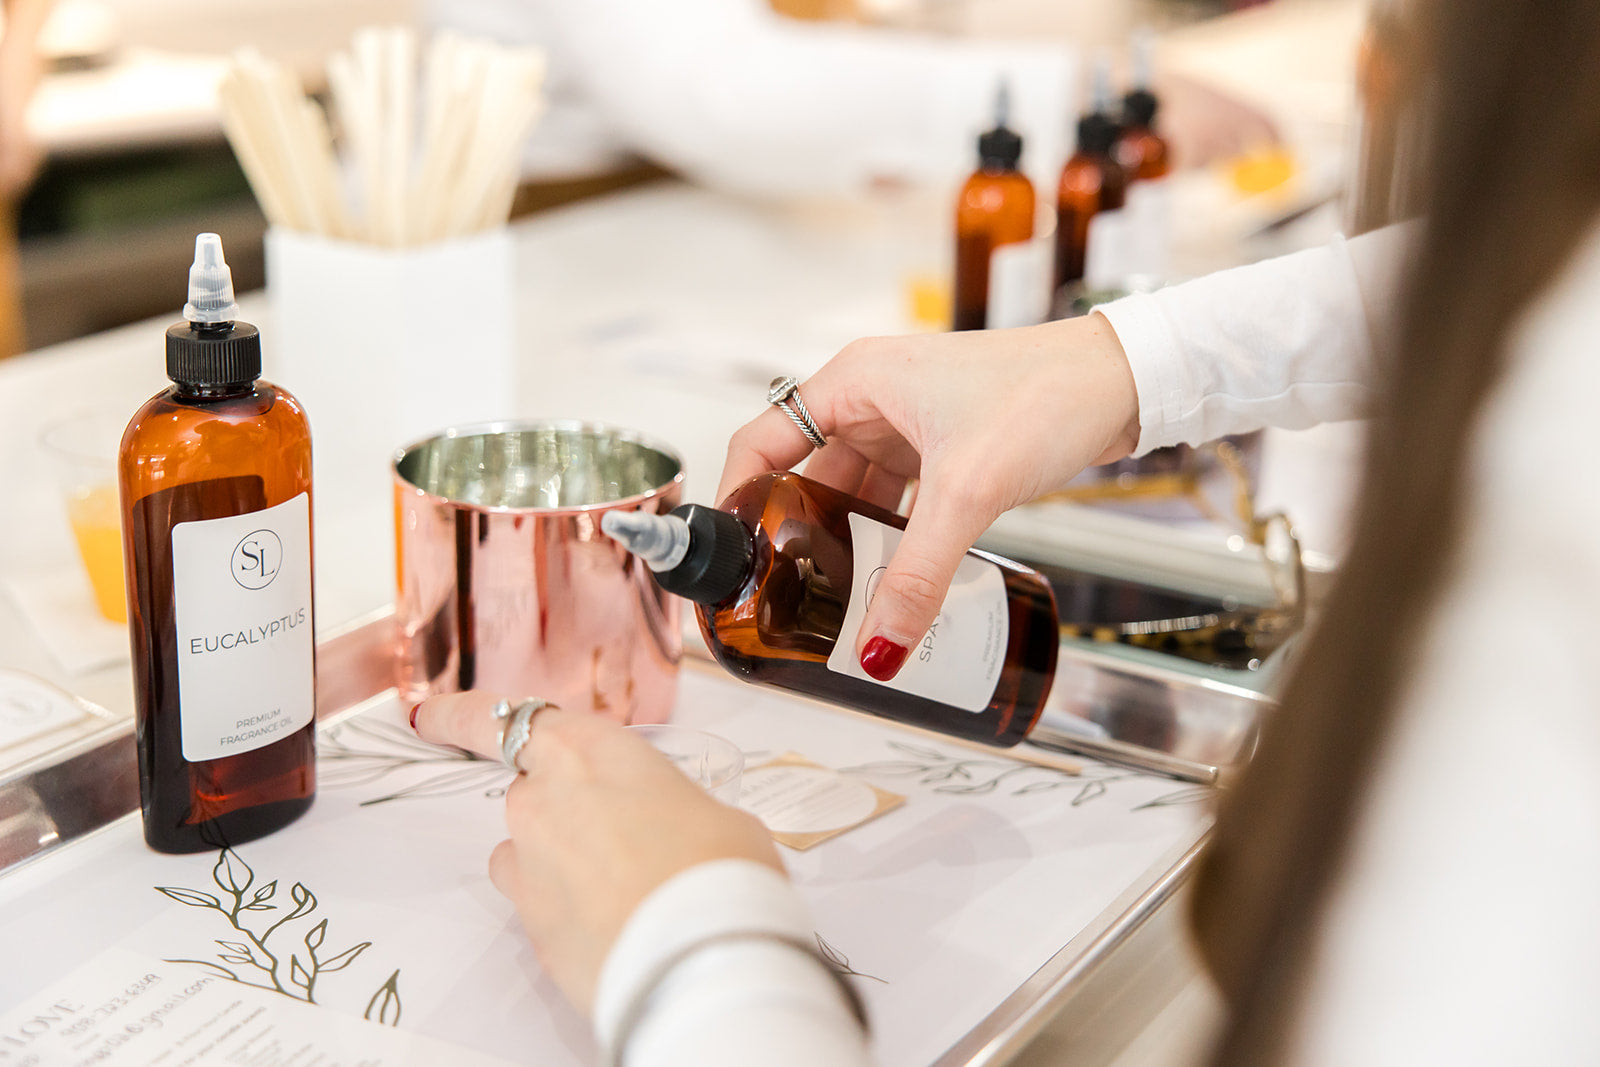 A person carefully dispensing a liquid from a brown glass bottle into a metallic measuring cup at a well-organized workstation with various bottles and ingredients on display, hinting at a process of precise formulation or bespoke product creation.